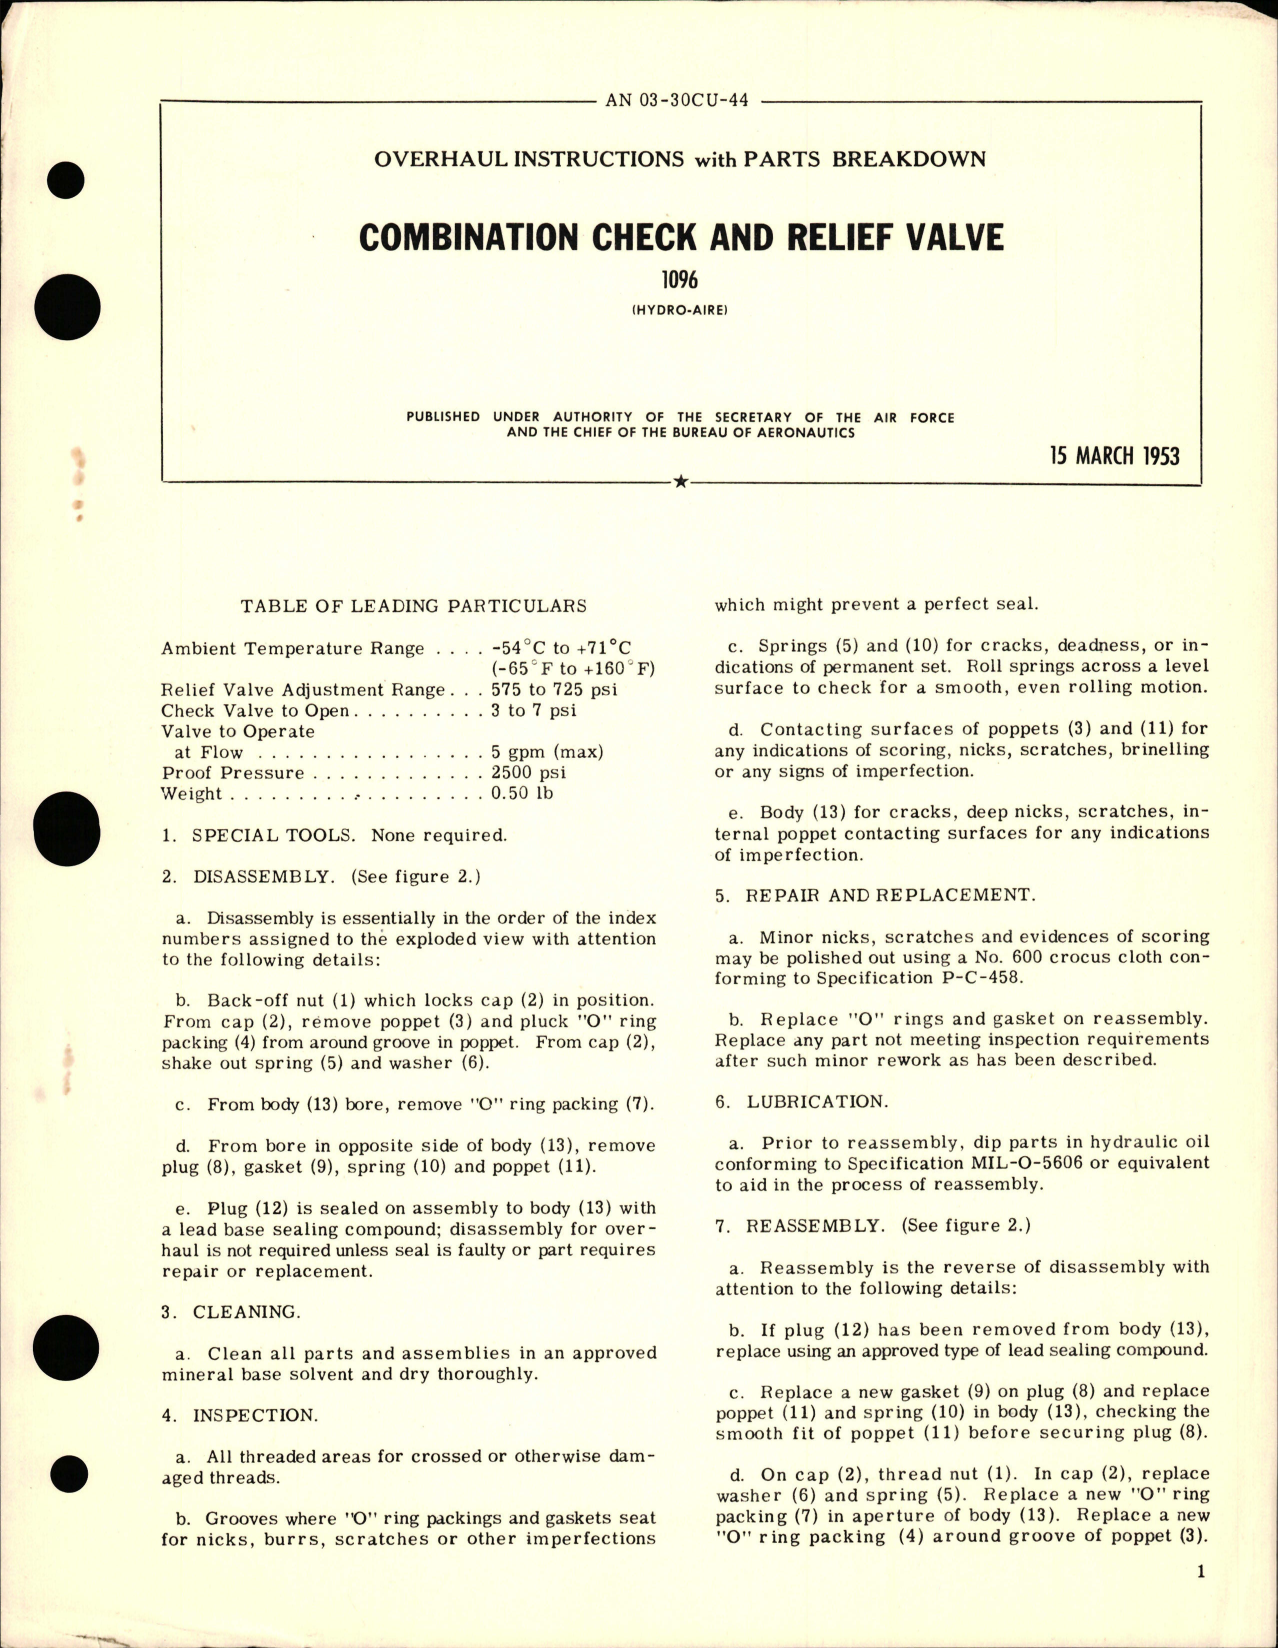 Sample page 1 from AirCorps Library document: Overhaul Instructions with Parts for Combination Check and Relief Valve - 1096